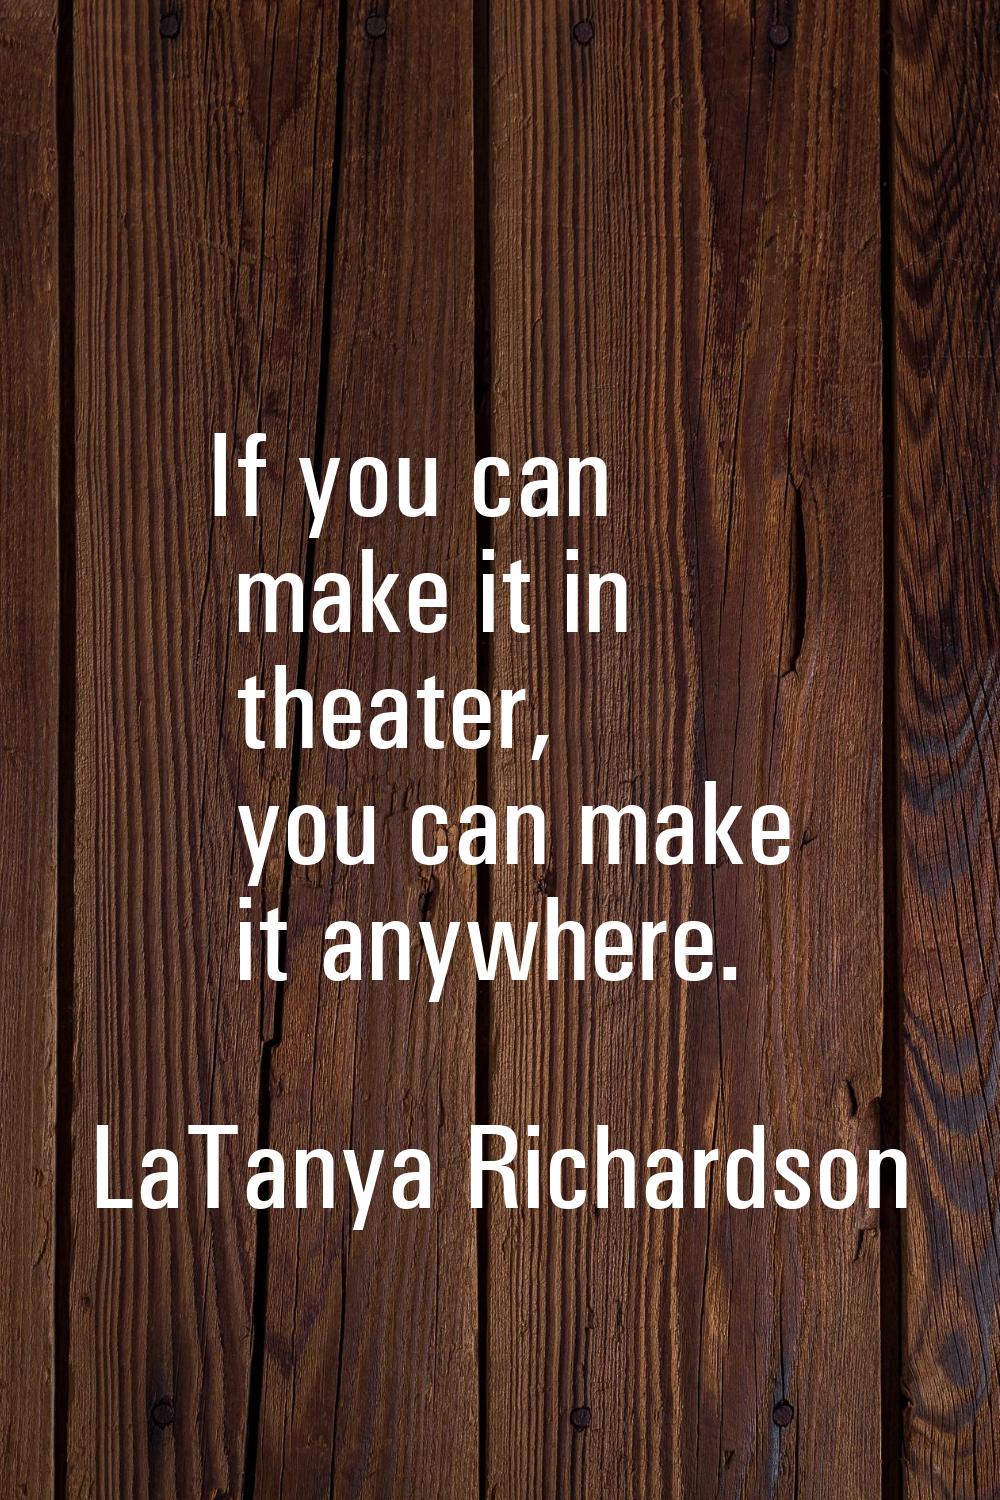 If you can make it in theater, you can make it anywhere.